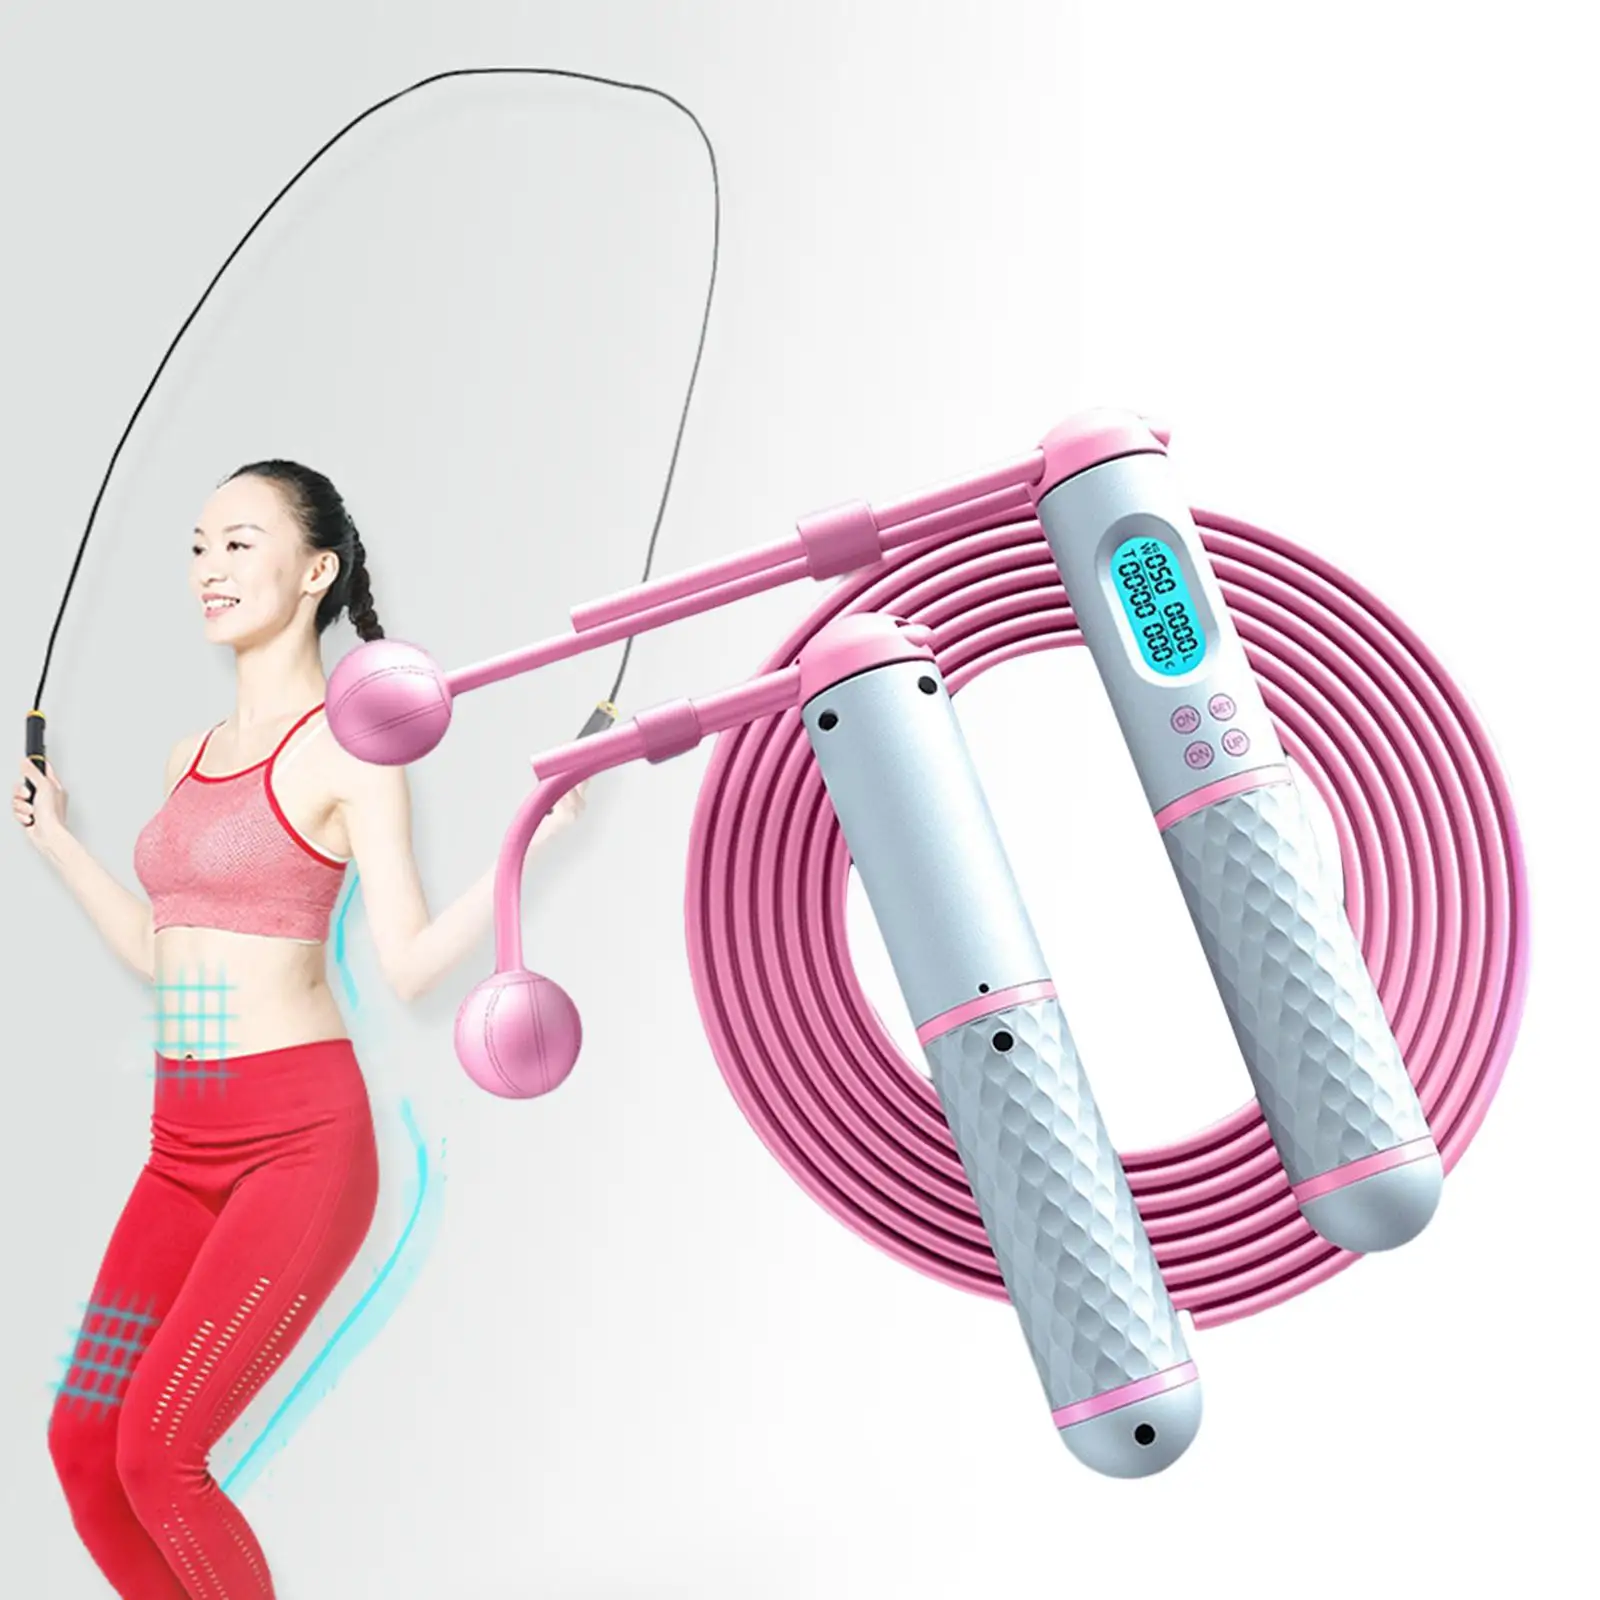 Skipping Rope Rope Jumping with for Burn Calorie Sports Fitness Training Women Men